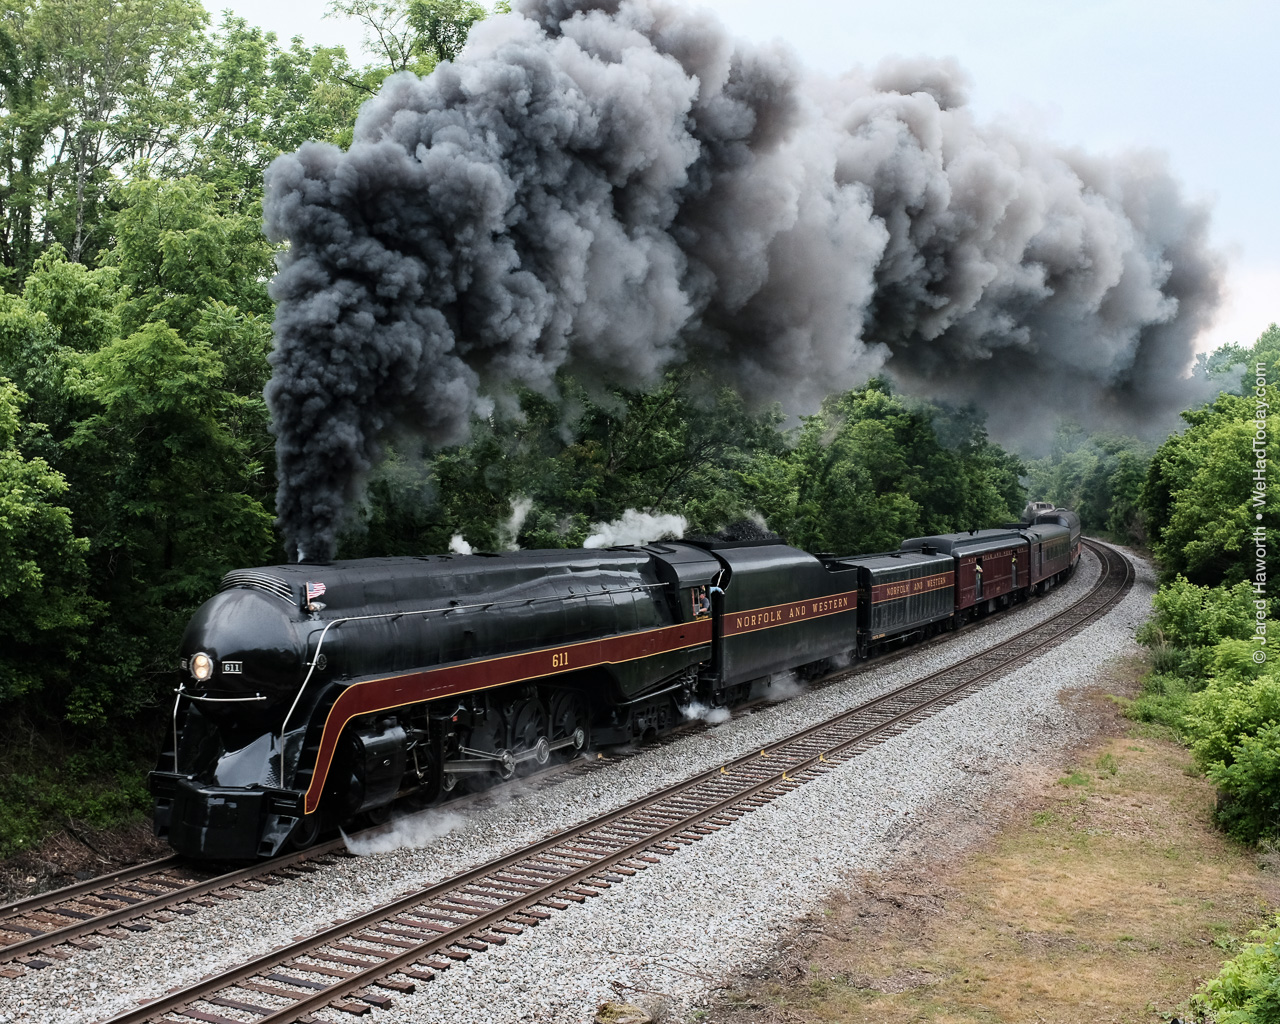 Rounding a curve, the 611 nears the summit in Blue Ridge, passing between the remains of a 1950s era bridge over the tracks.